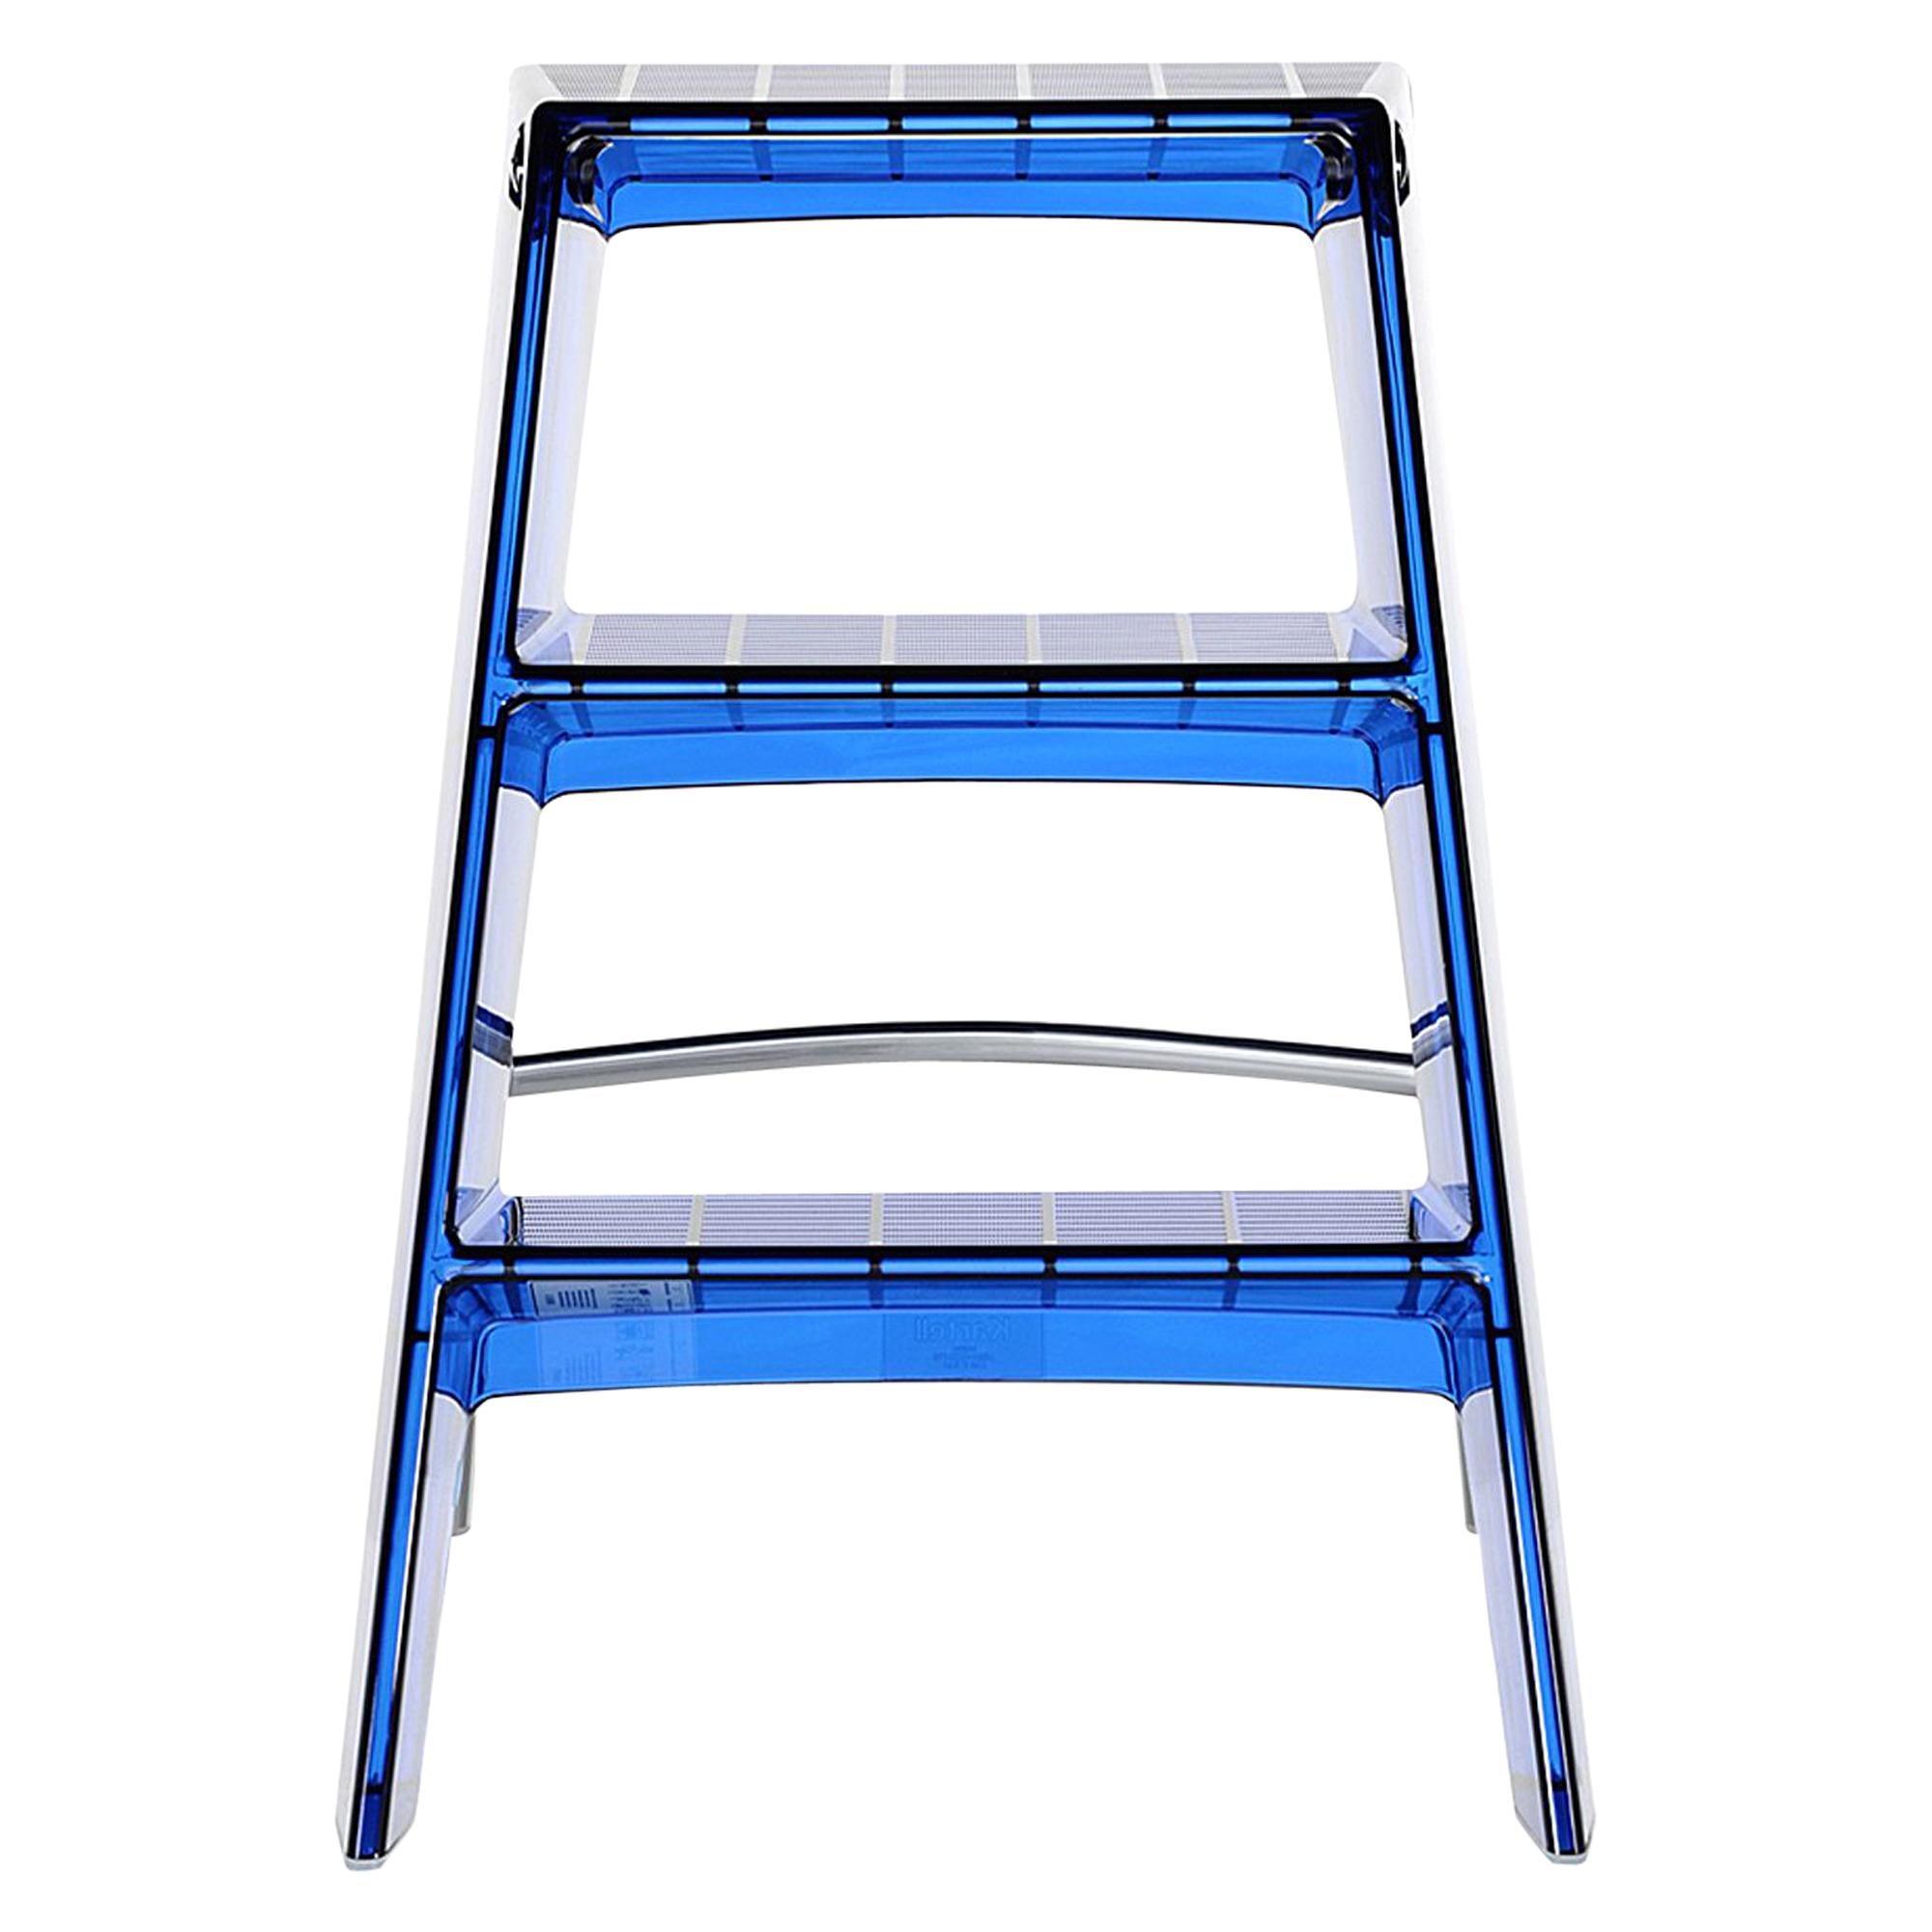 Kartell Upper Step Ladder in Cobalt by Alberto Meda, Paolo Rizzatto